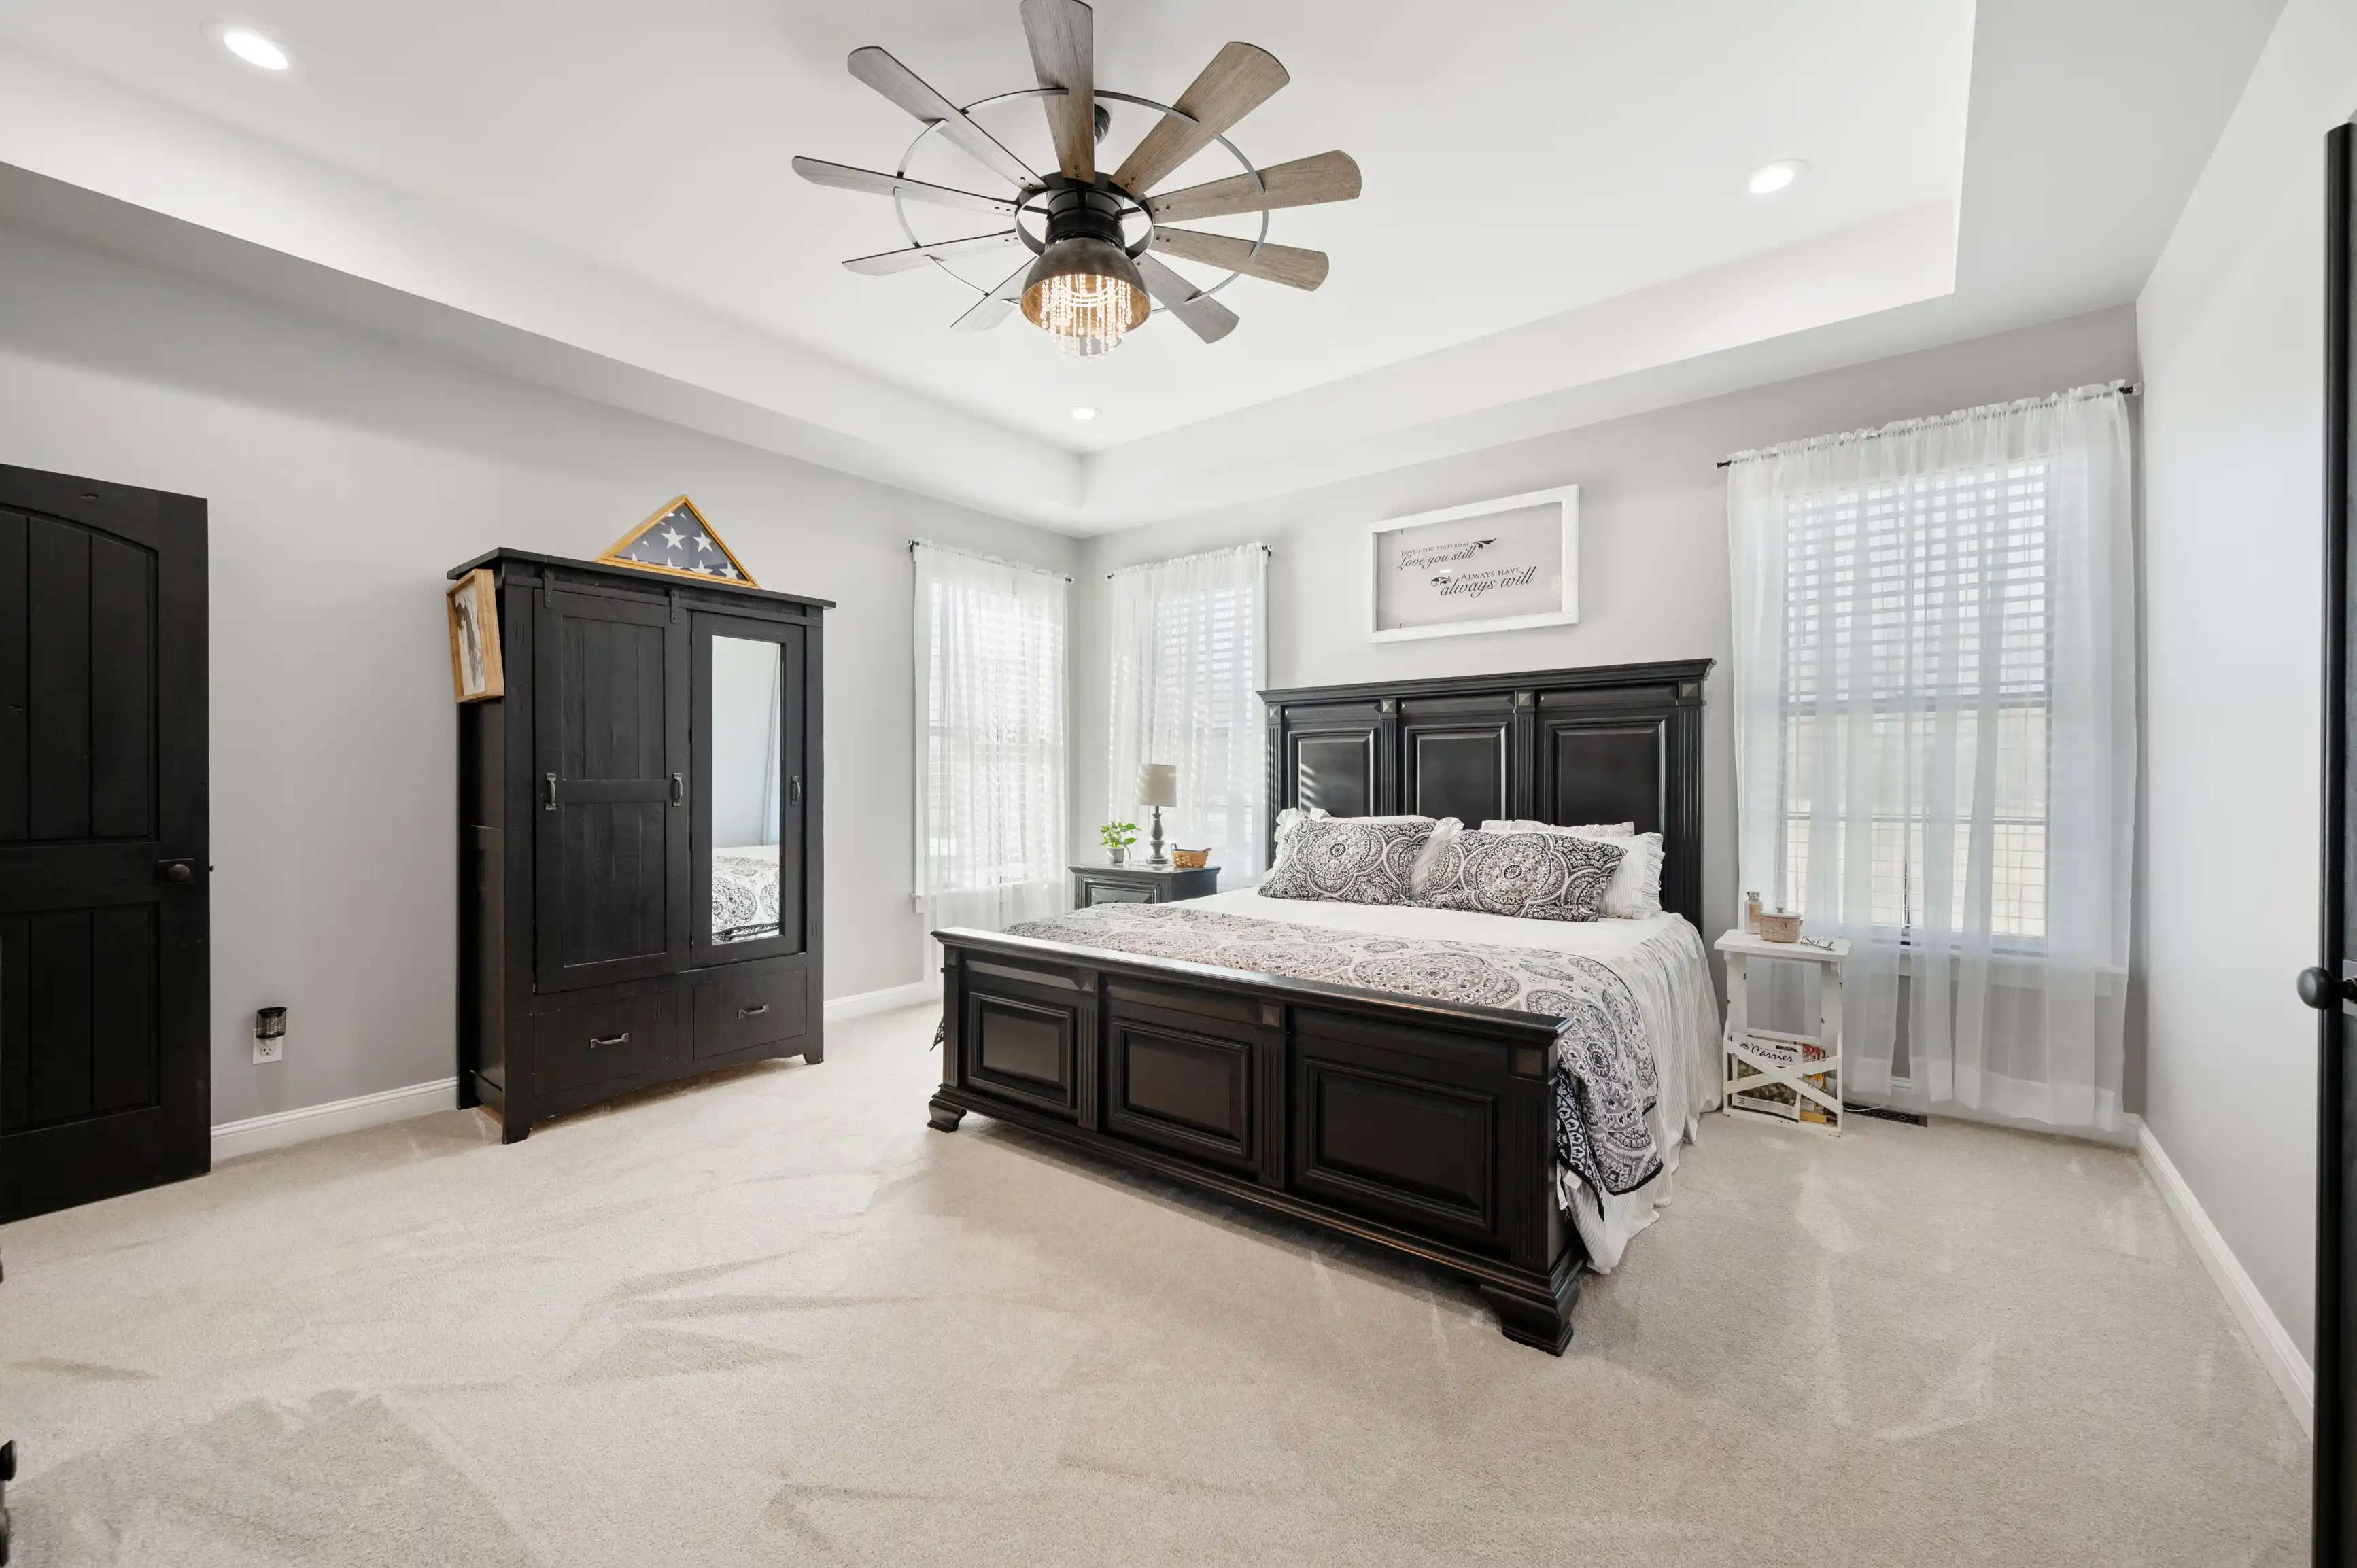 Elegant bedroom featuring a large black bed with patterned bedding, a wooden wardrobe, a modern ceiling fan, sheer curtains, and framed wall decor.